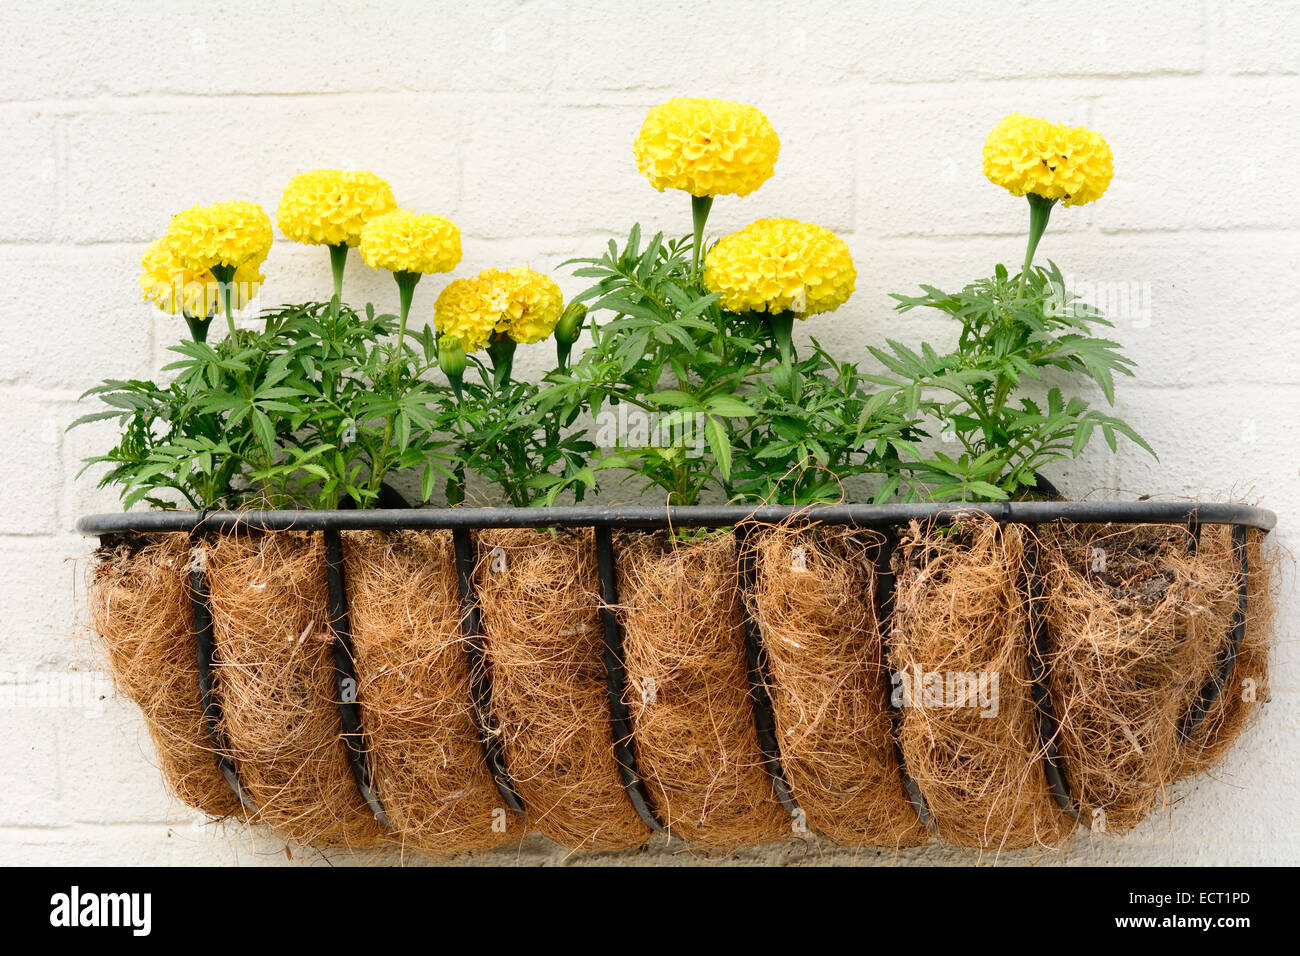 Yellow marigolds in wall mounted pot Stock Photo